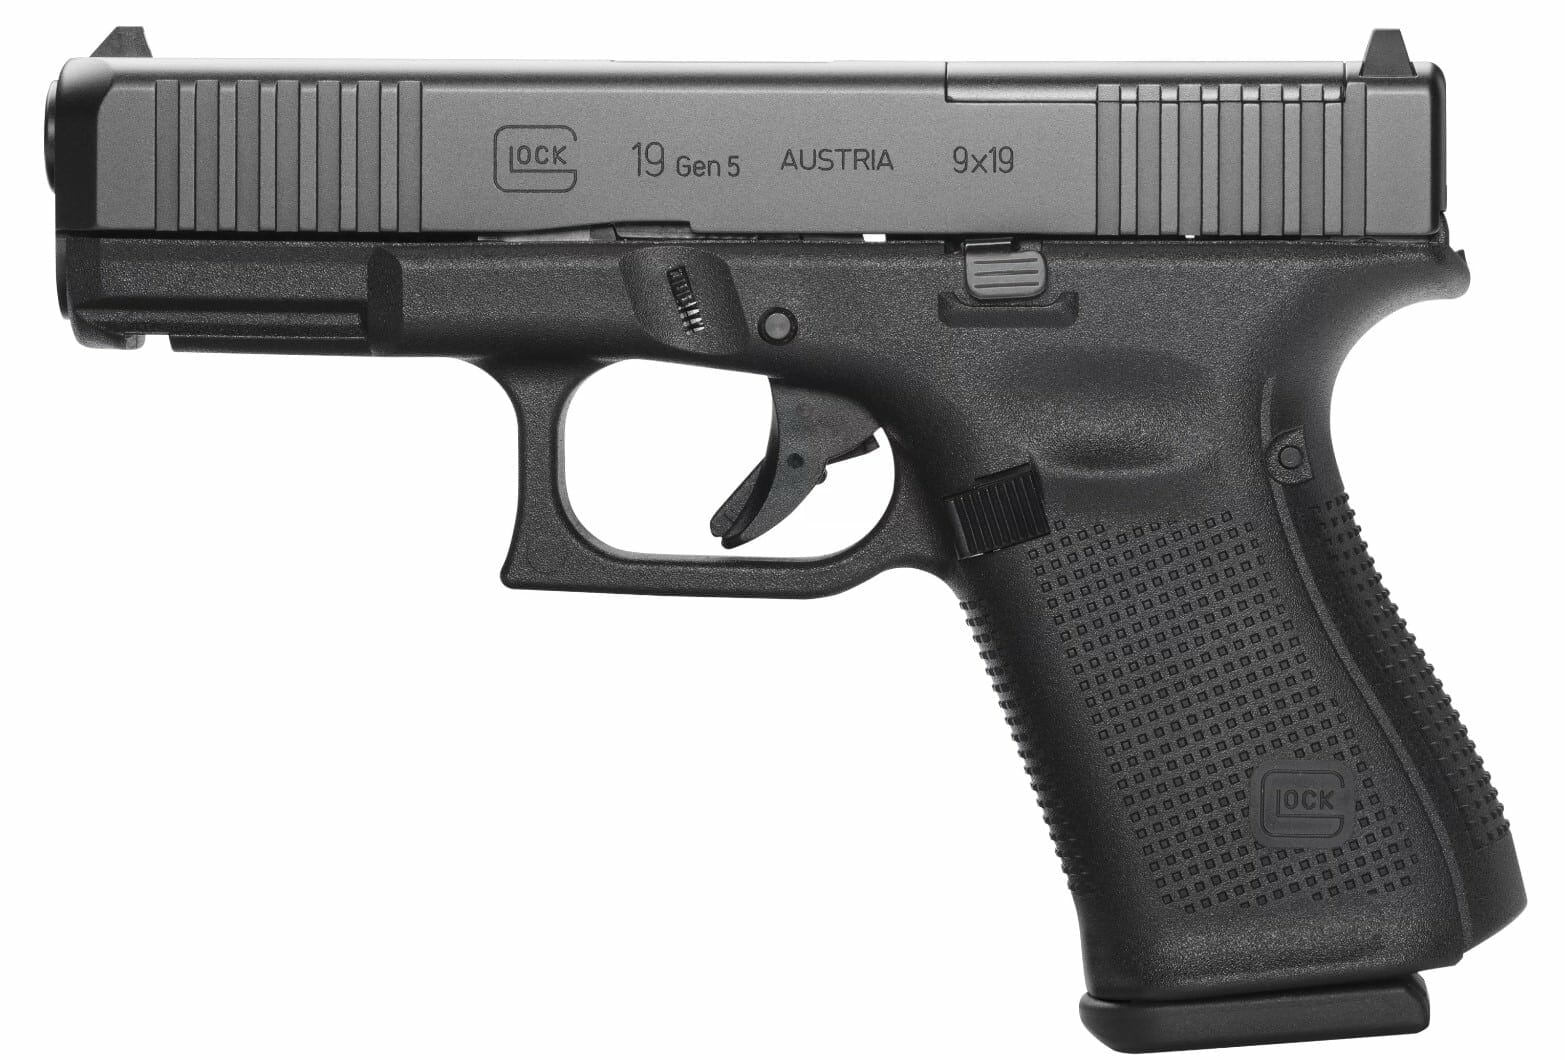 check out our review about glock 19